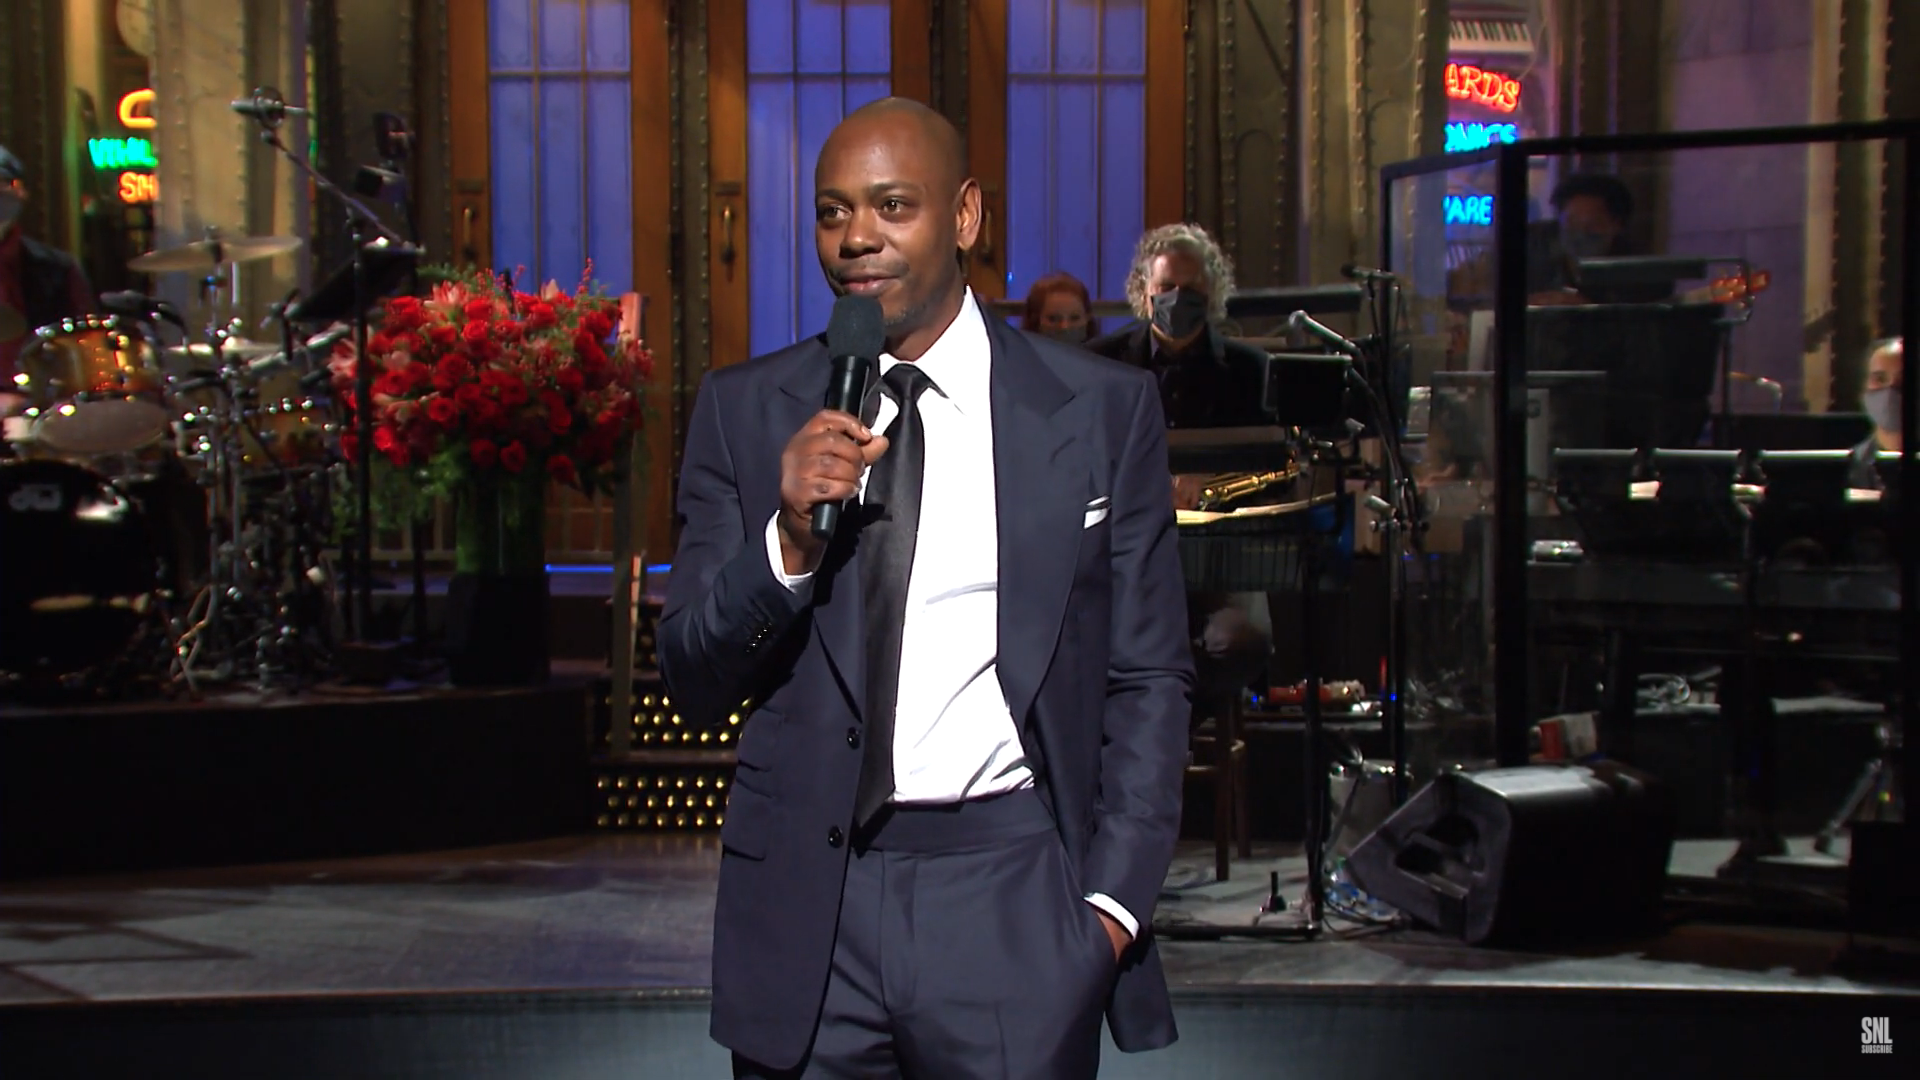 Dave Chappelle on SNL delivers biting commentary on Trump, race